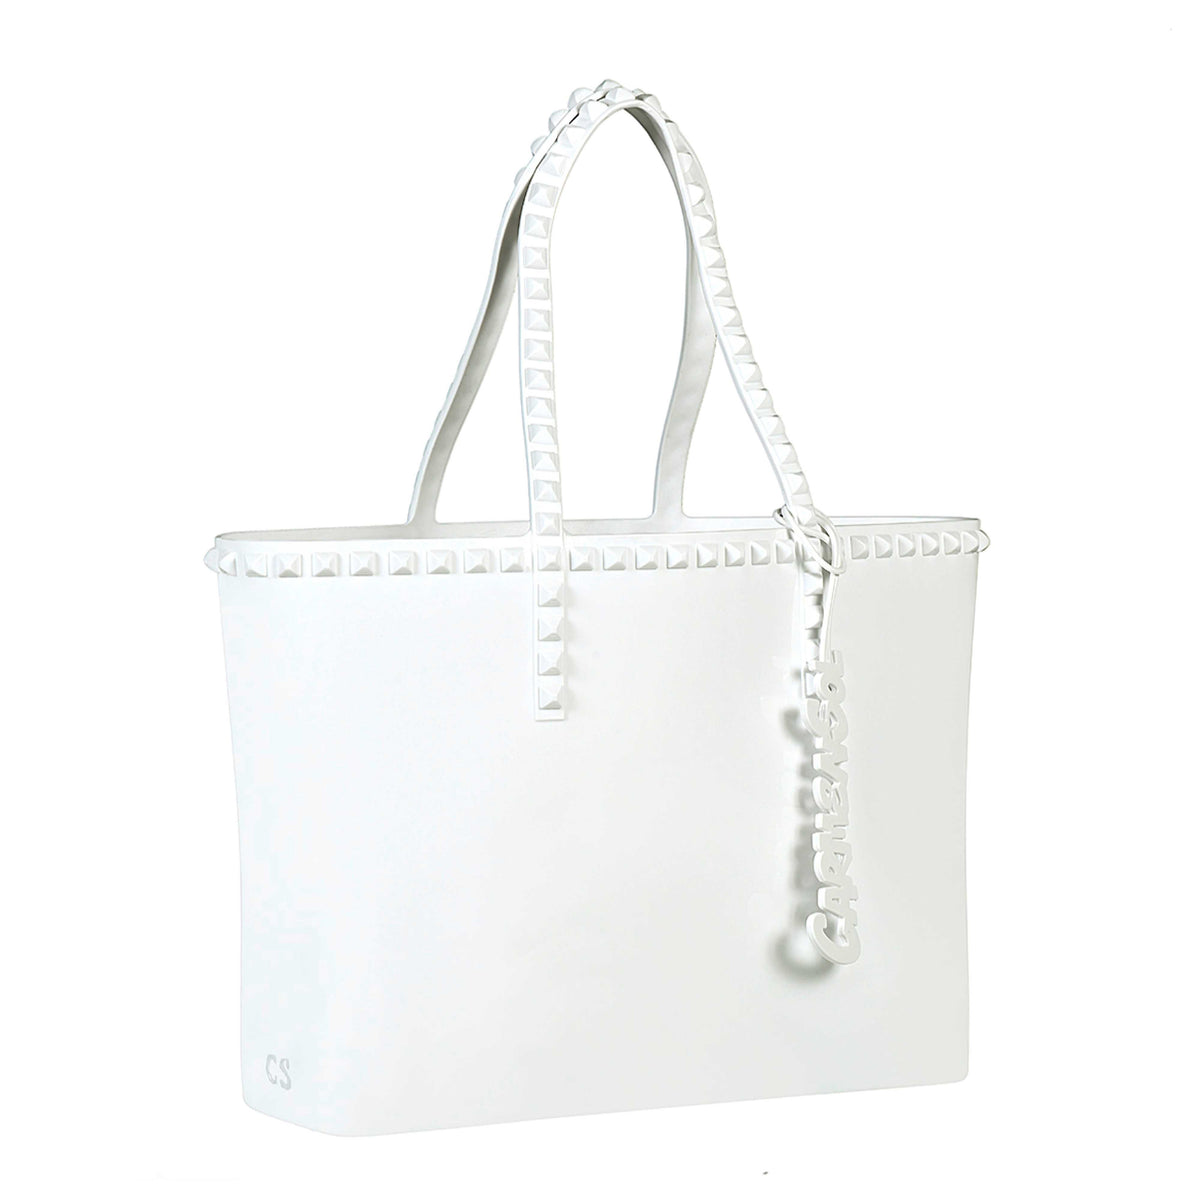 Sustainable Seba beach bags for women with studs in color white